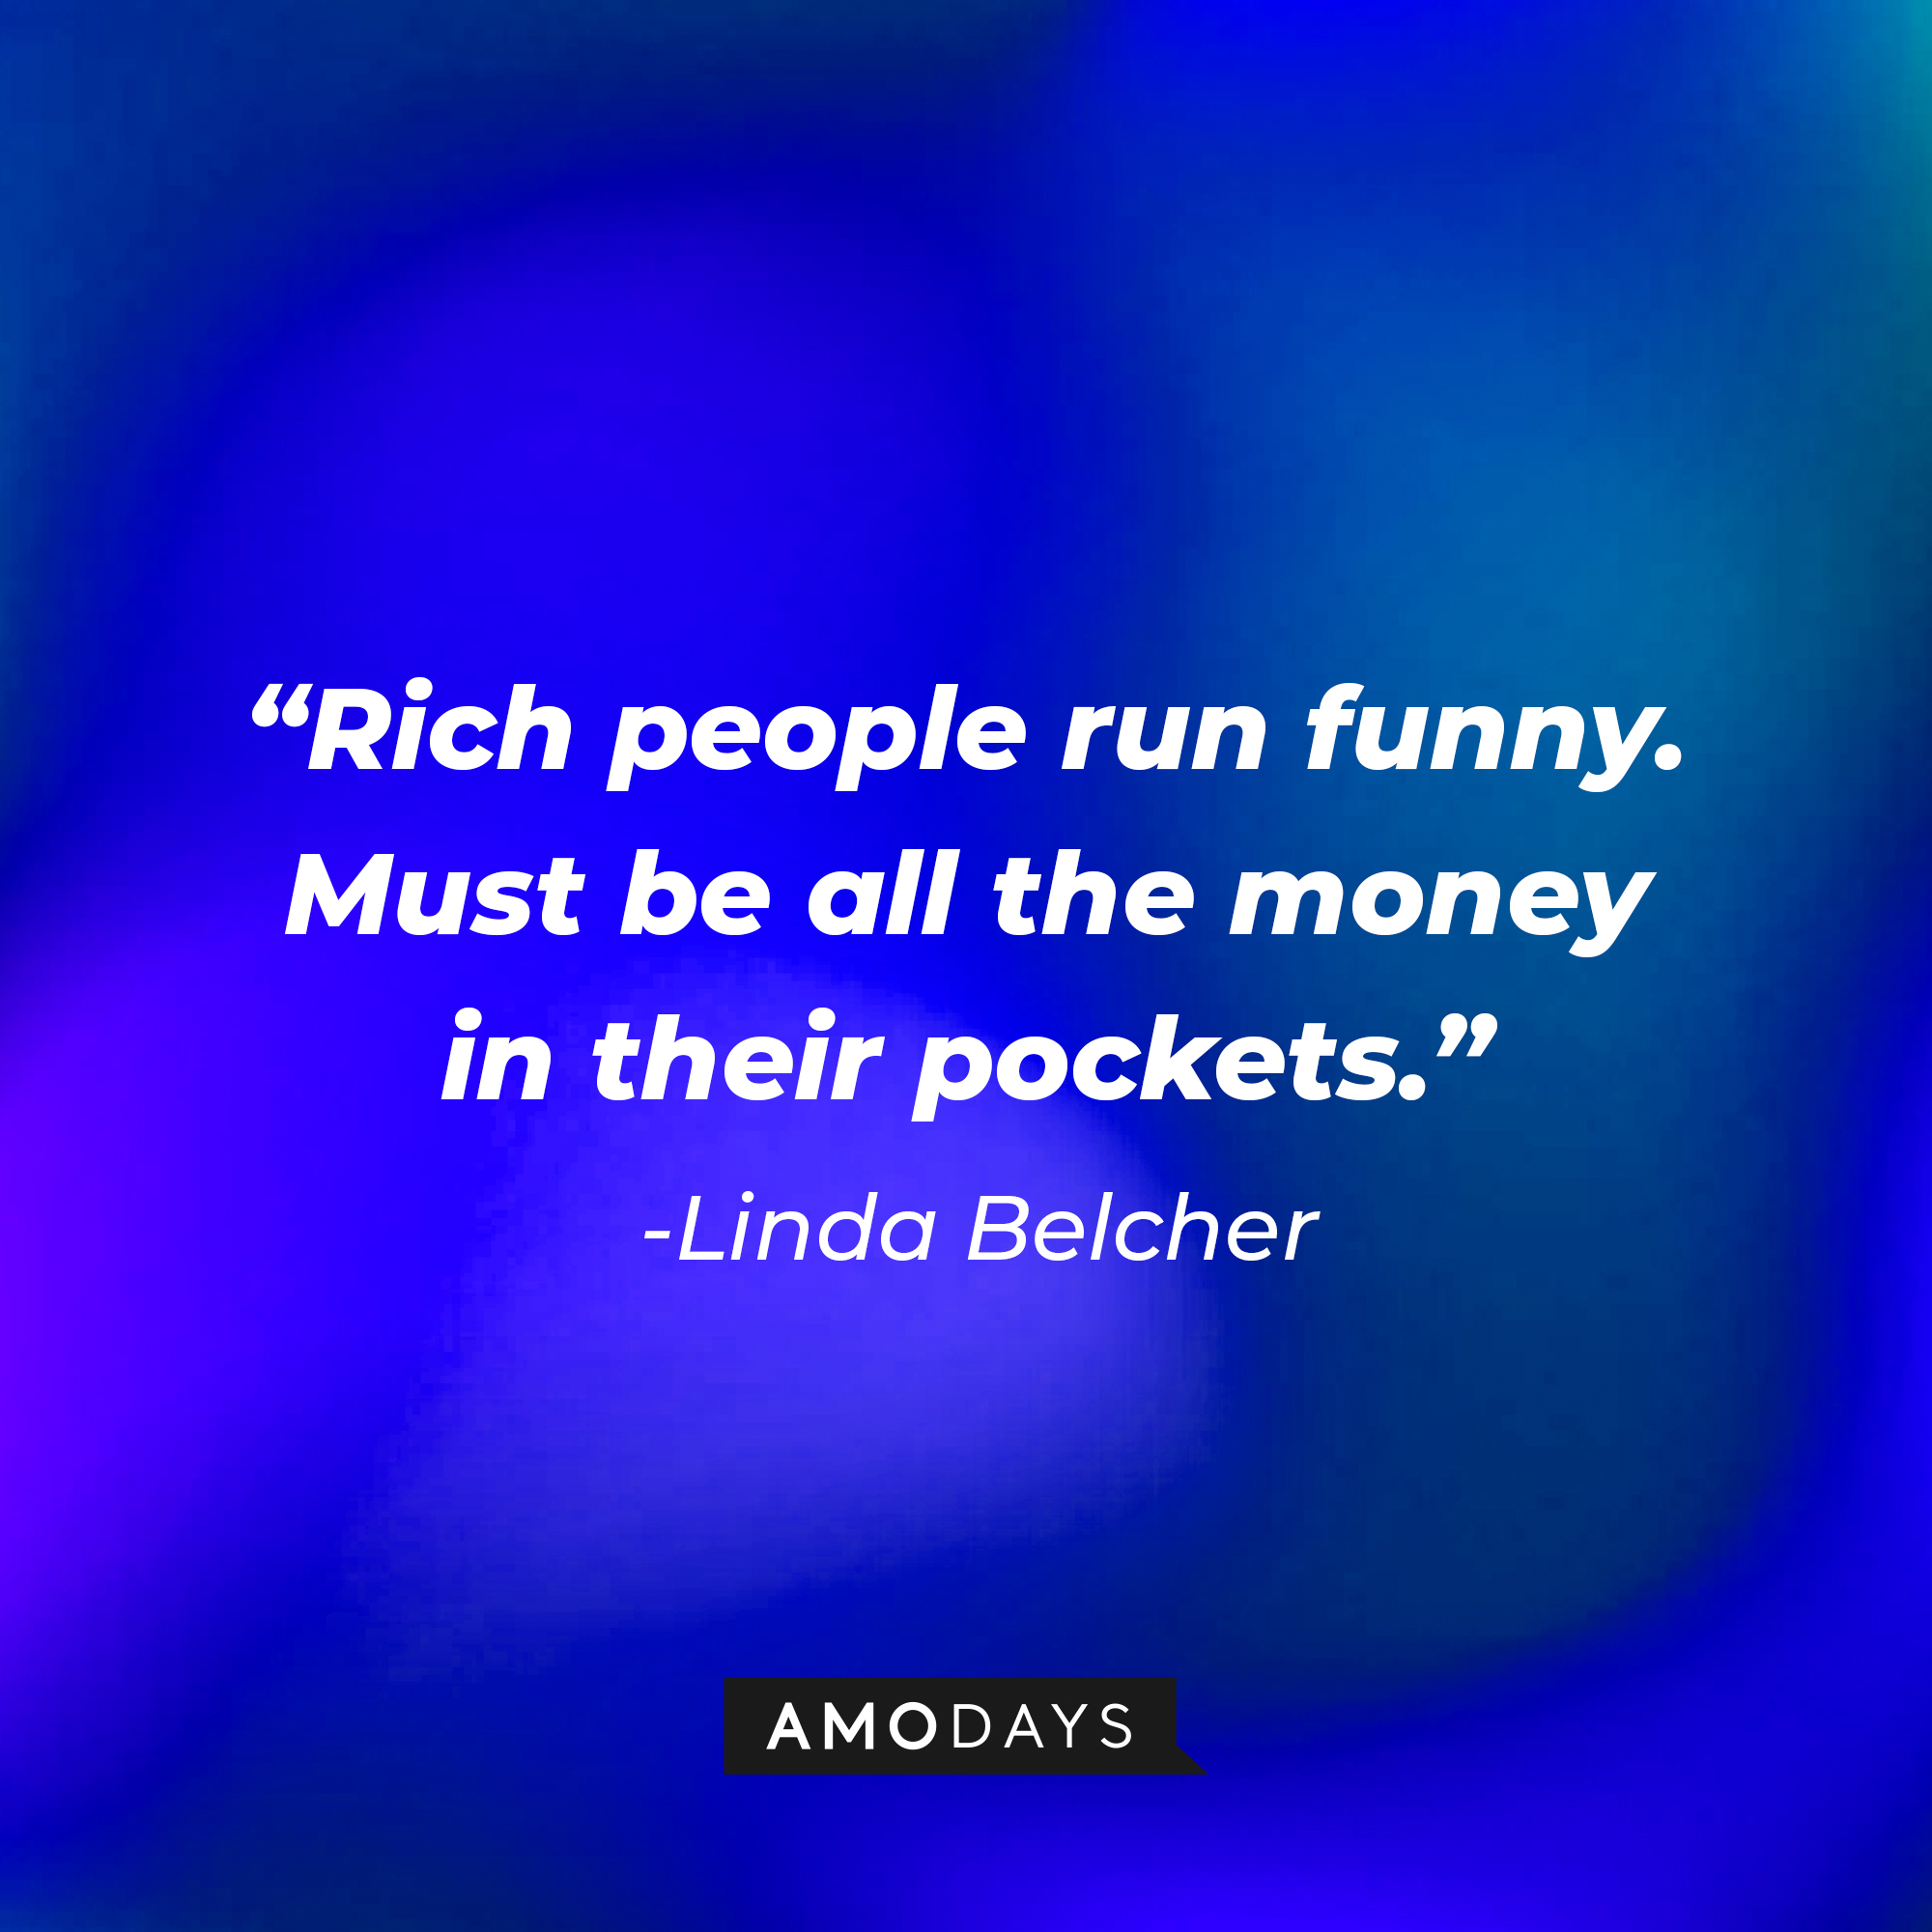 Linda Belcher’s quote: “Rich people run funny. Must be all the money in their pockets.”   | Source: AmoDays